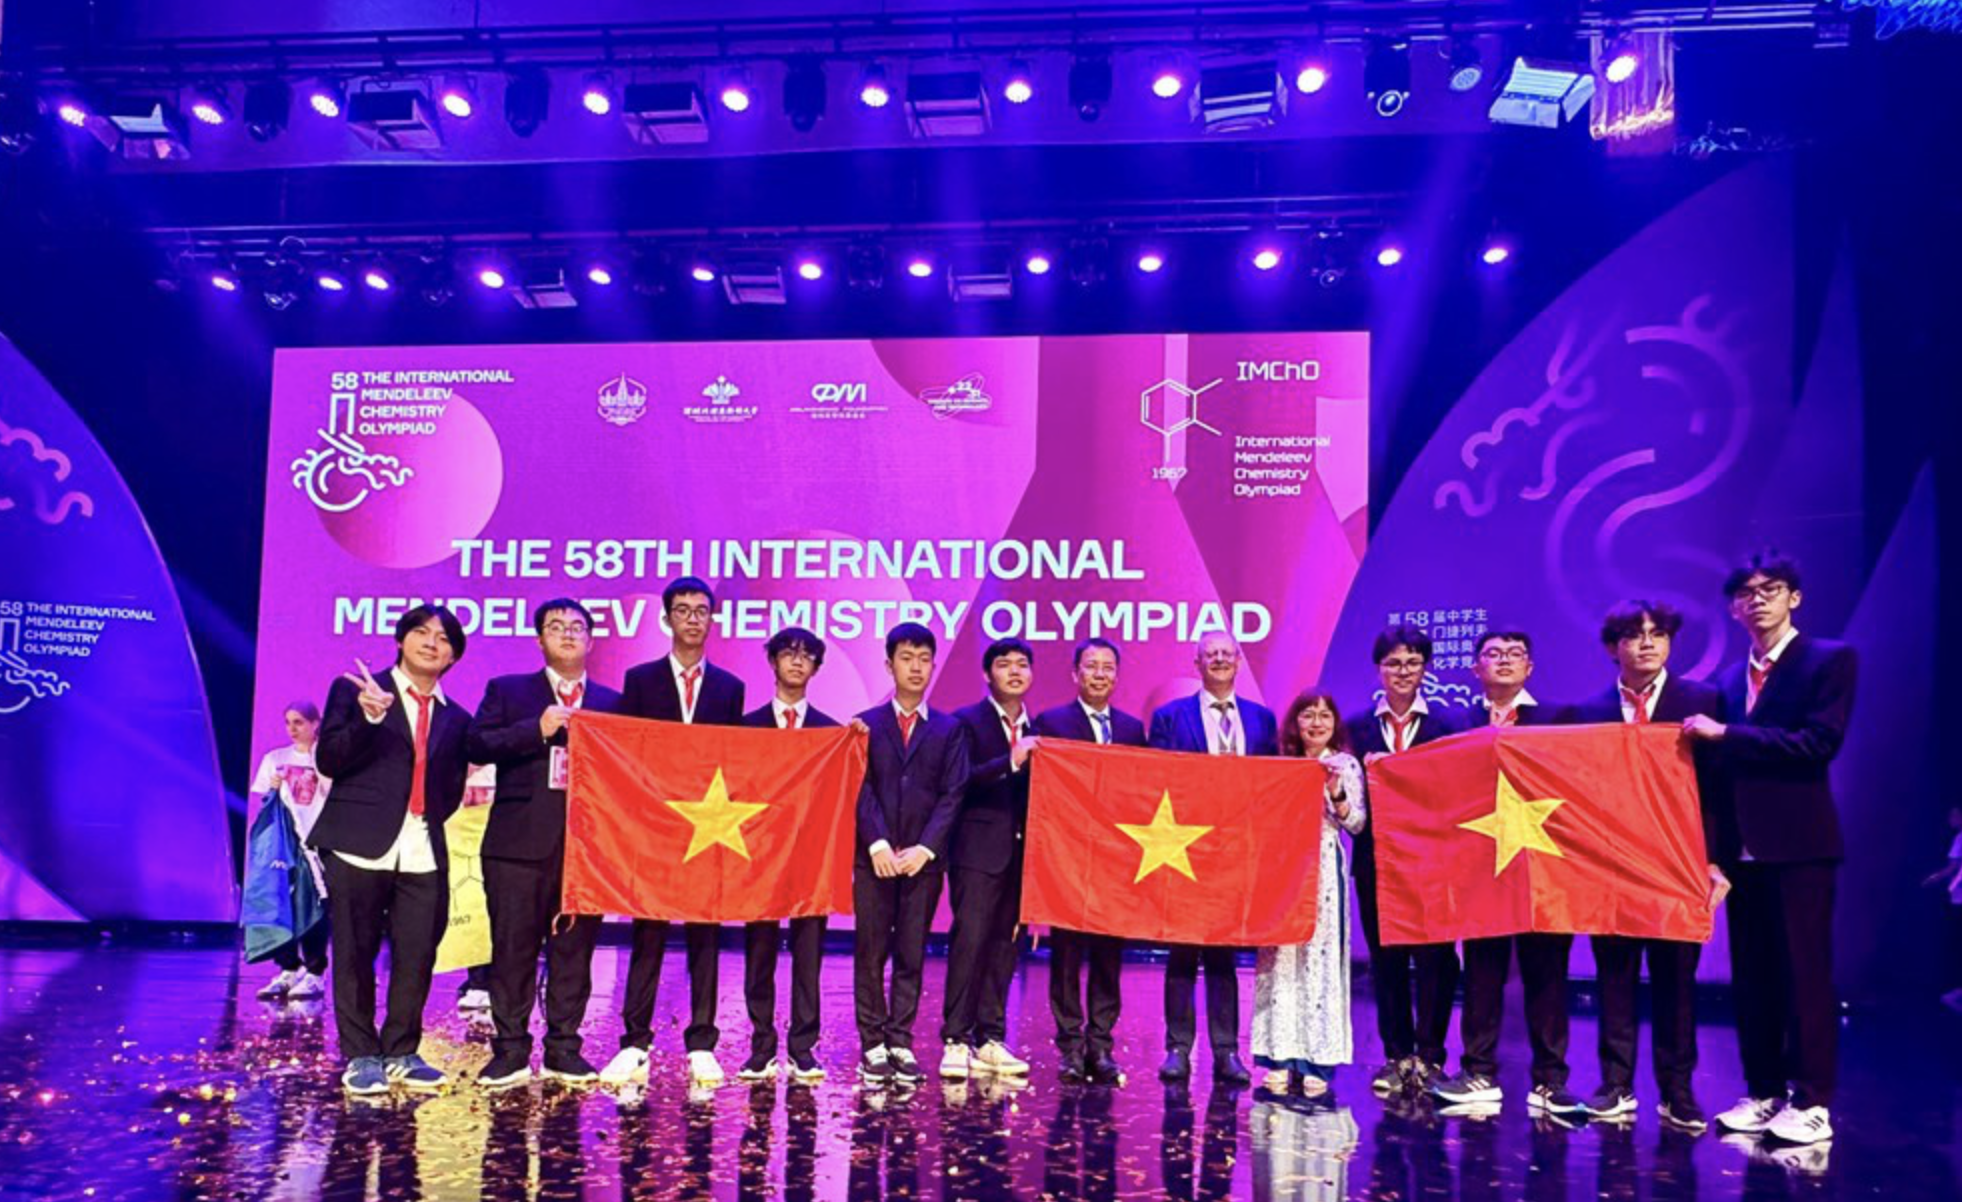 All 10 Vietnamese students bag medals at int’l Mendeleev chemistry olympiad